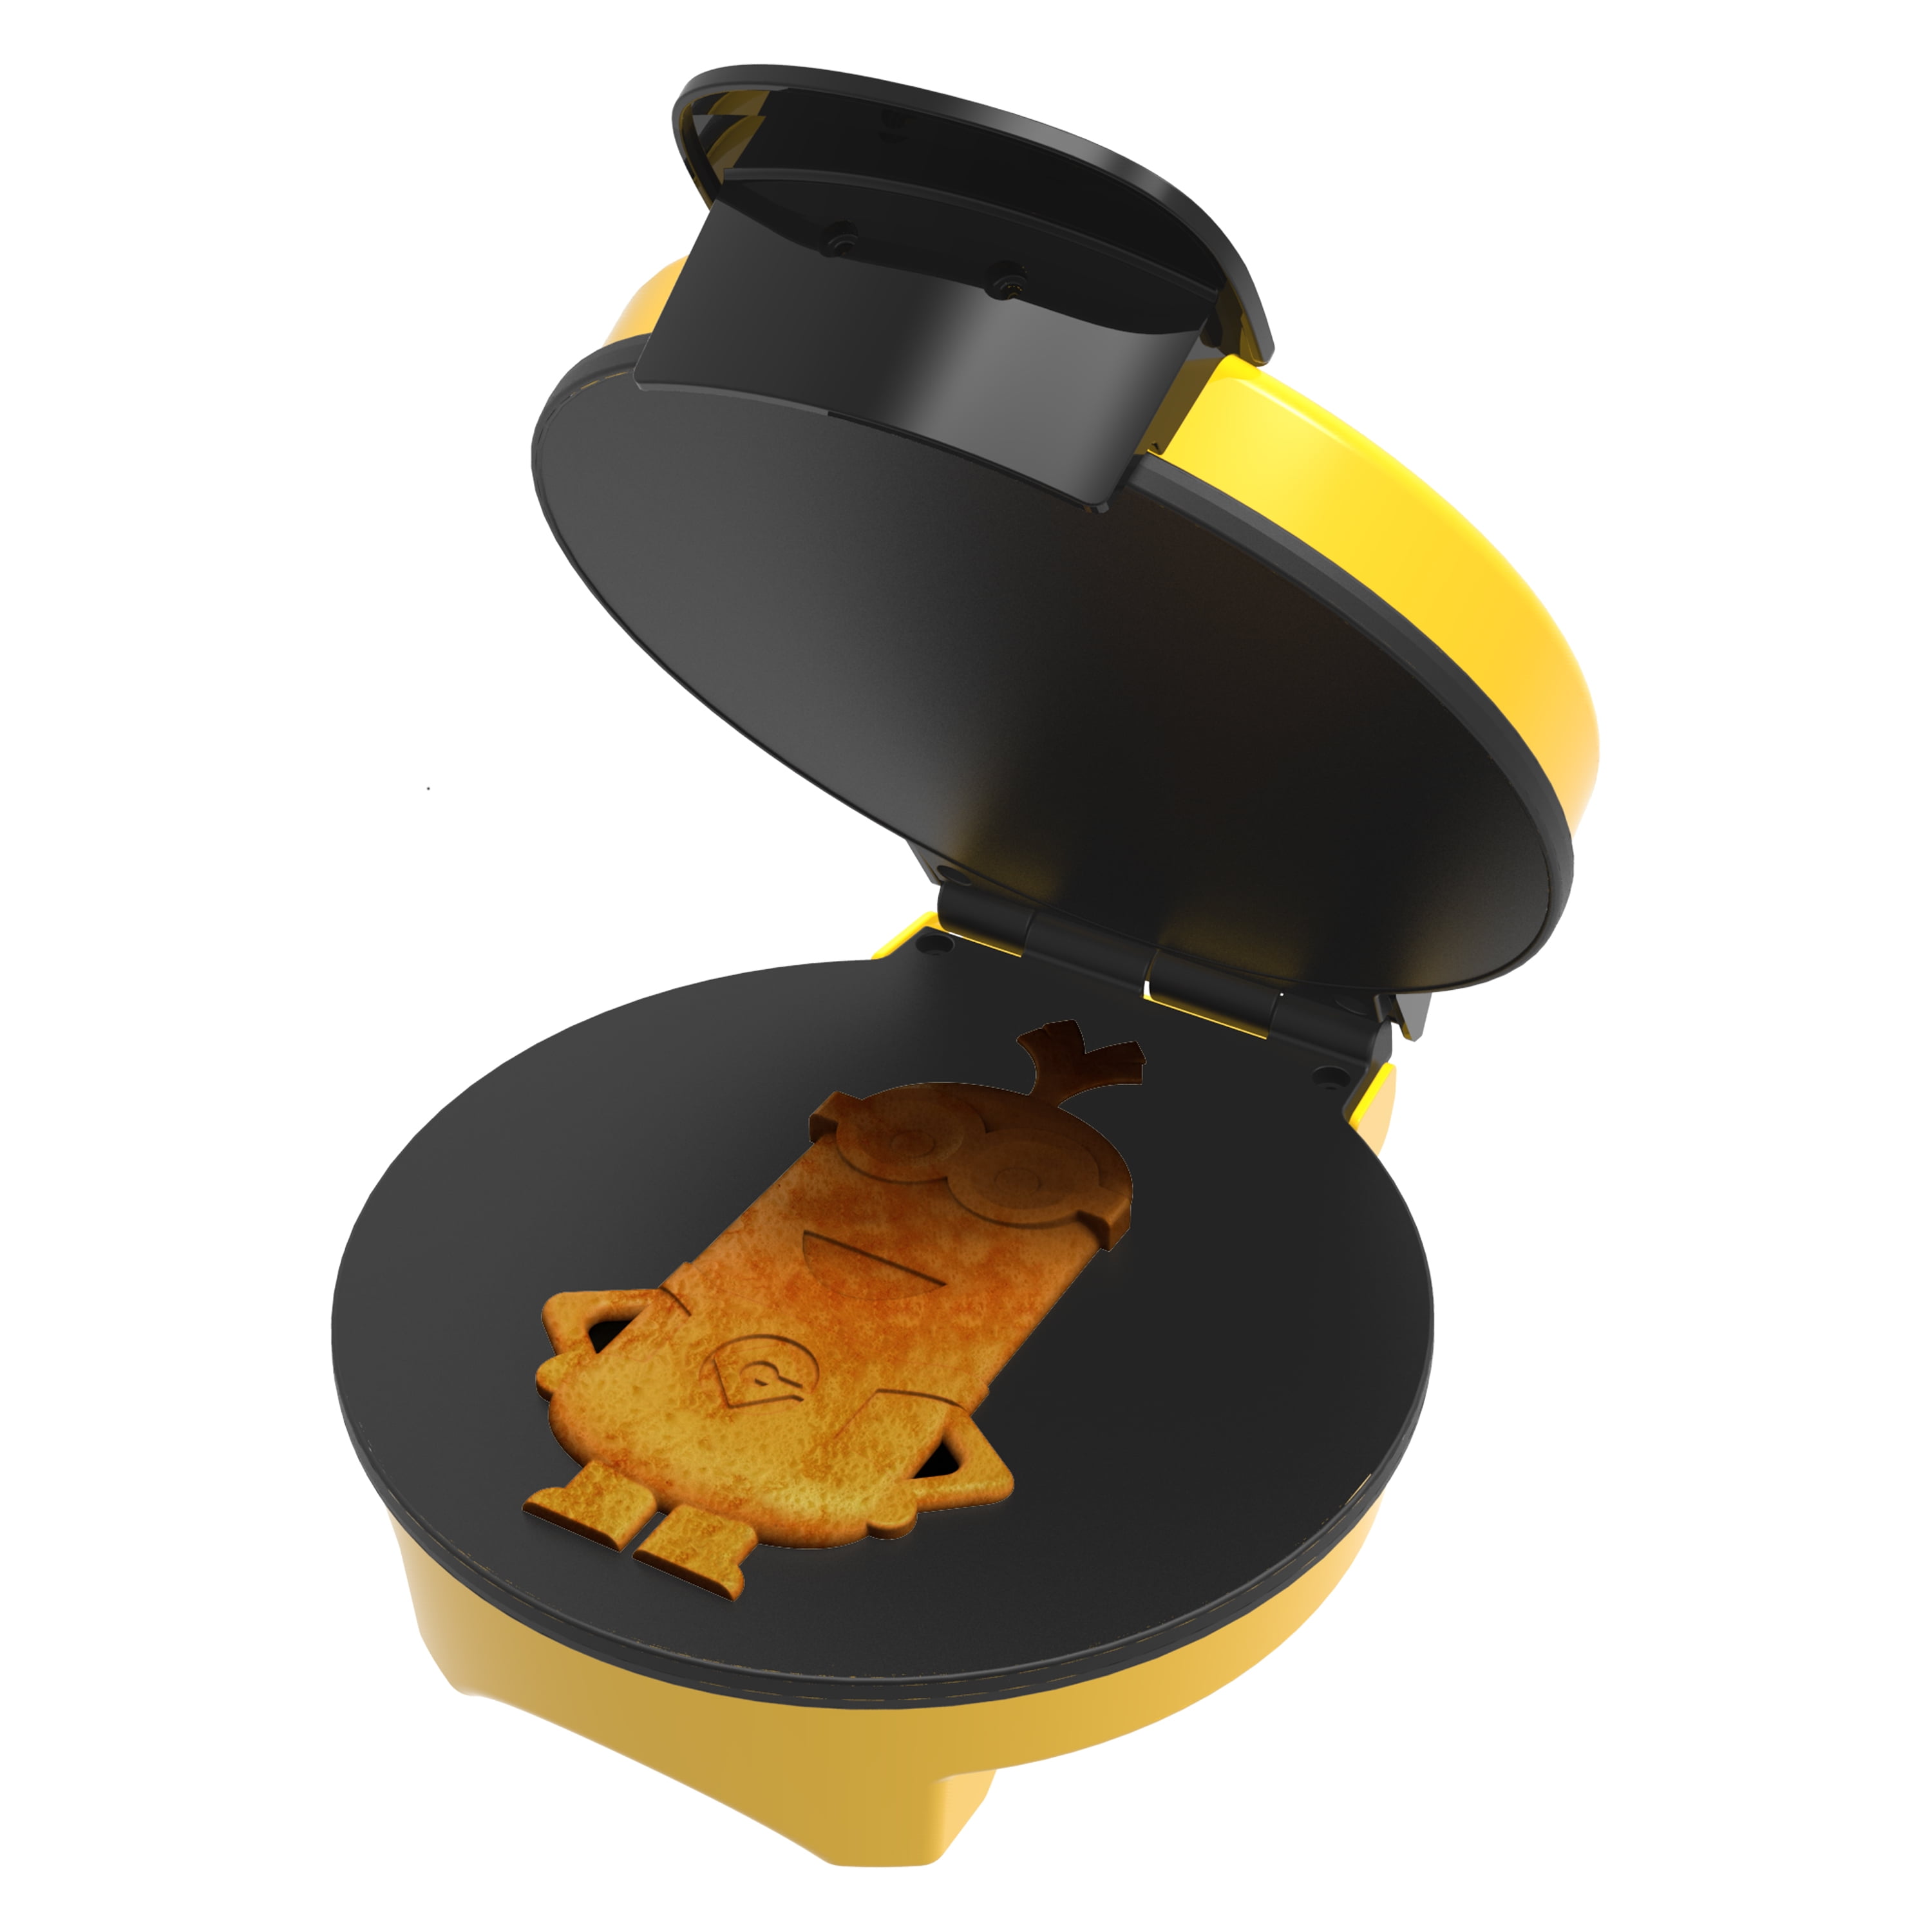 Uncanny Brands Minions Kevin Waffle Maker- Iconic Minion on Your